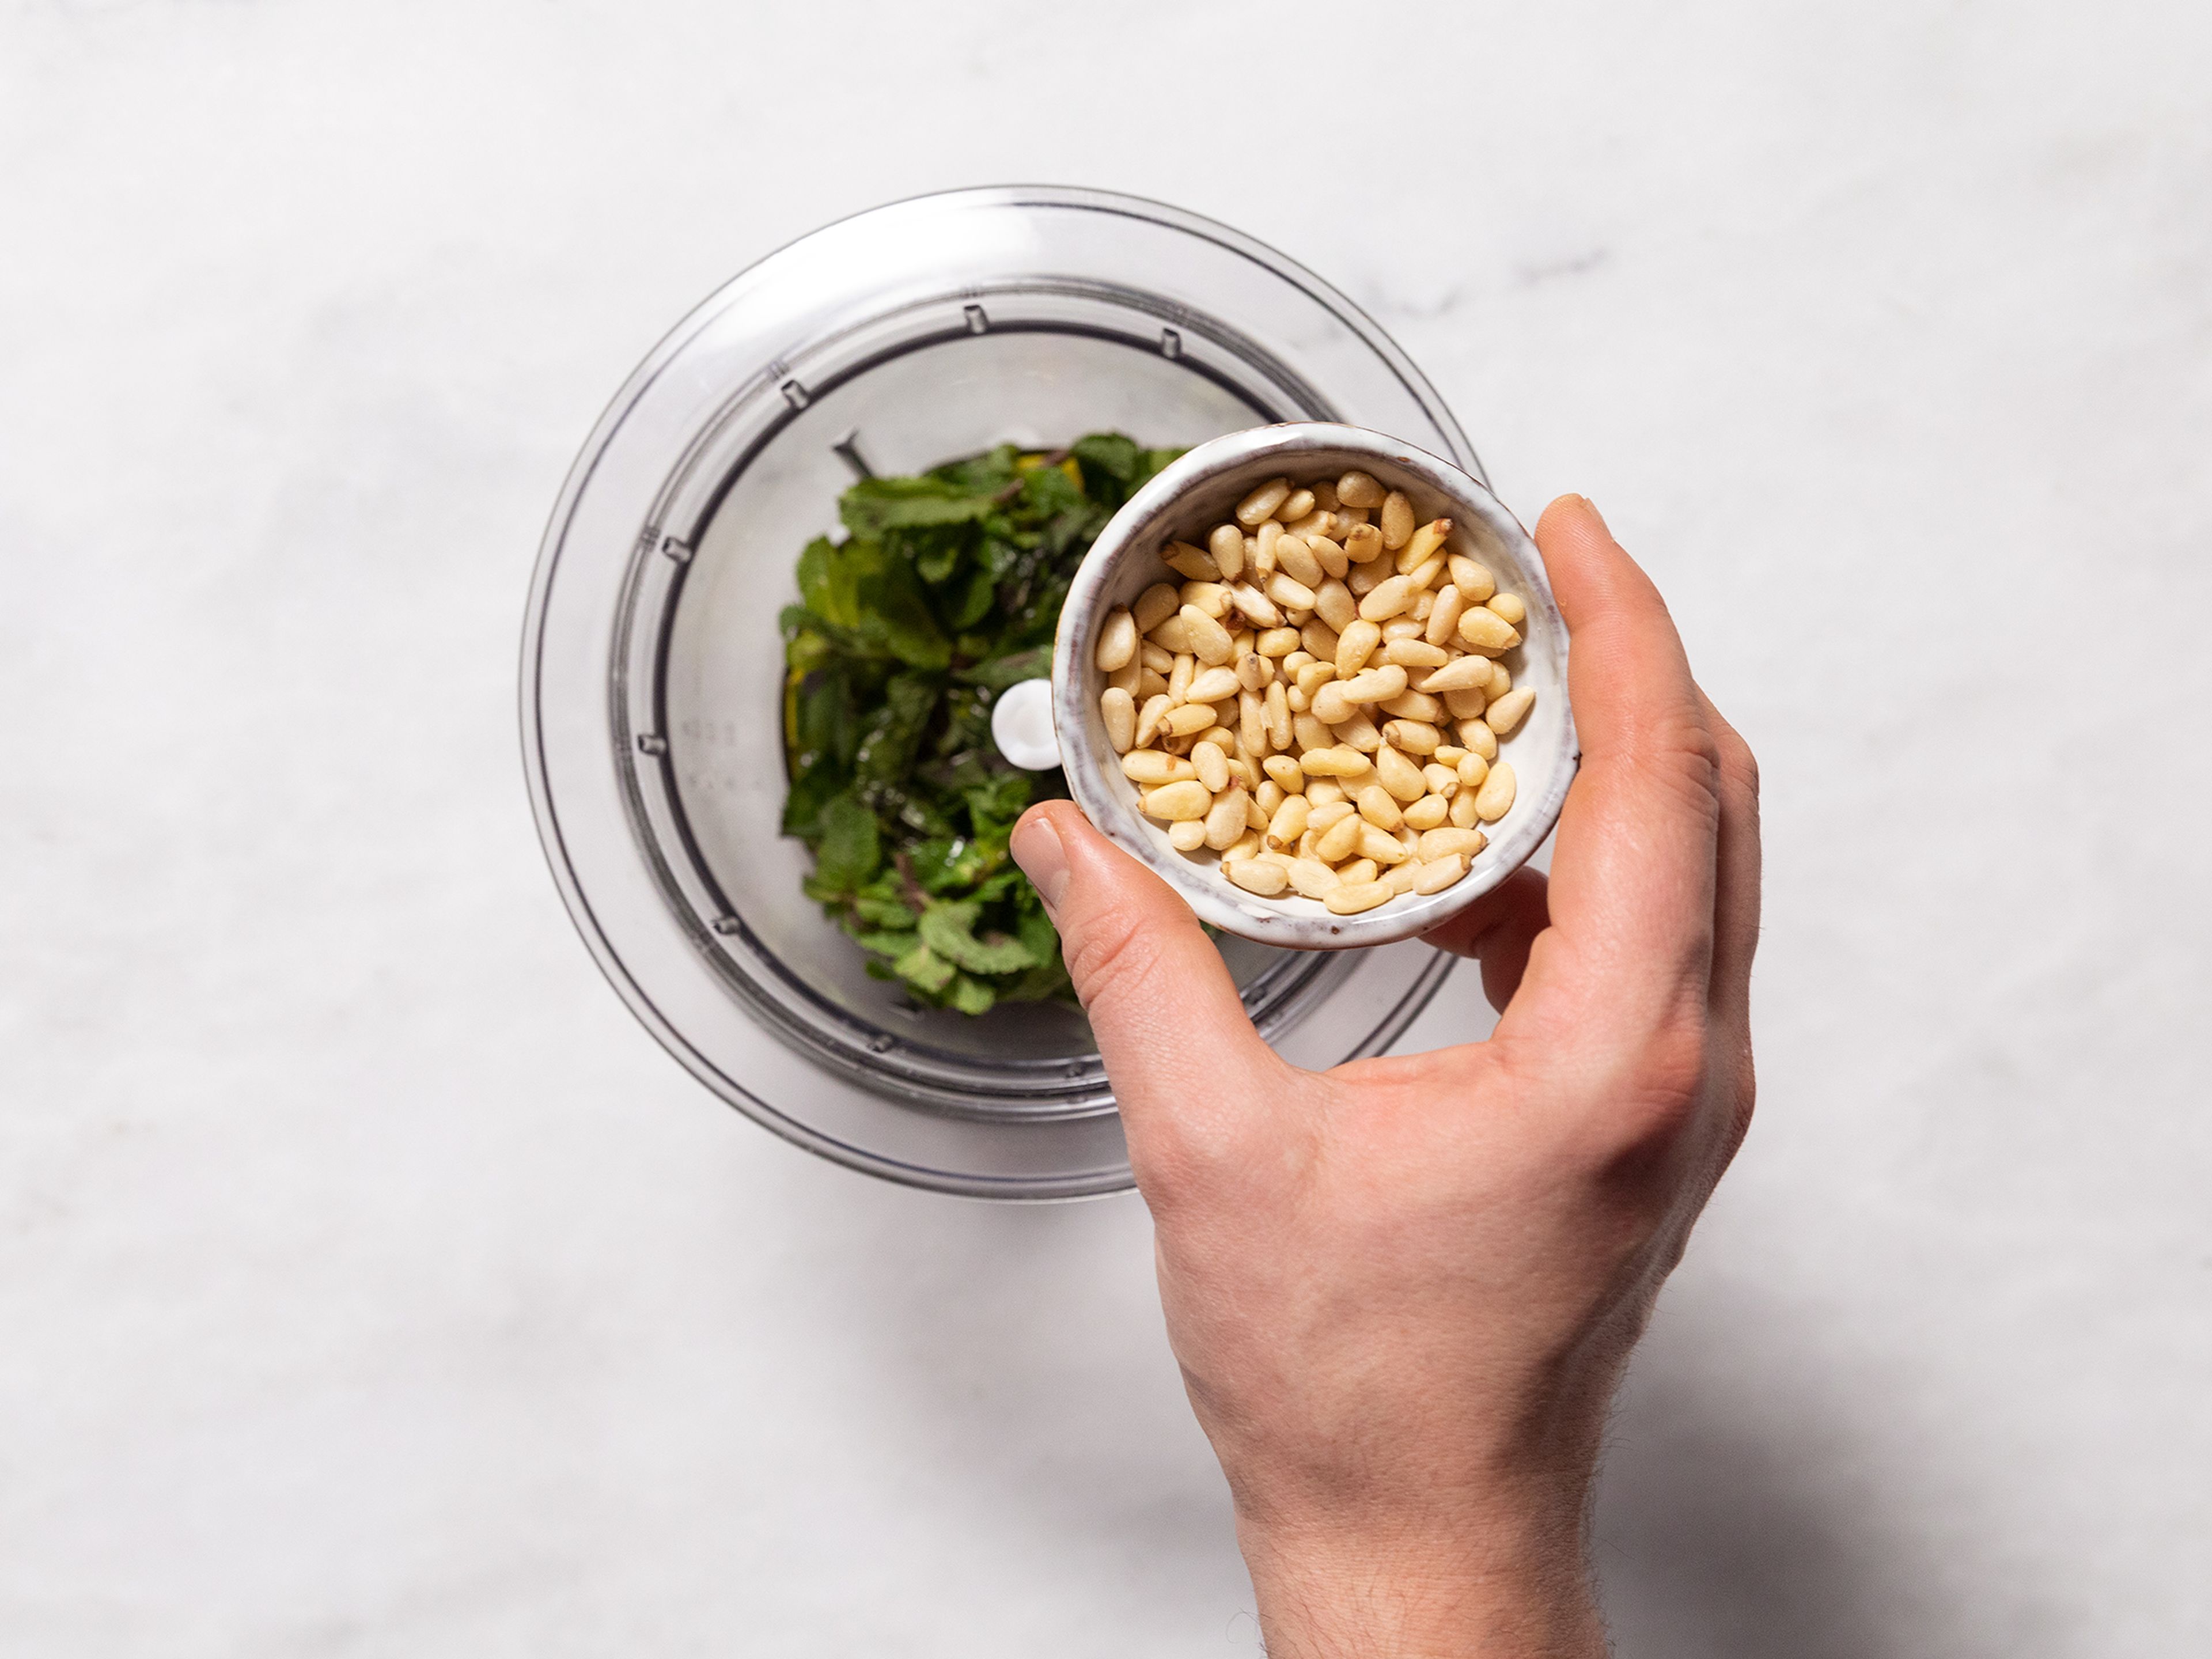 In the meantime, prepare the pesto: Add mint, olive oil, pine nuts, Pecorino cheese, and lemon juice to a food processor, season with salt and pepper, and blend until smooth. Set aside until serving.